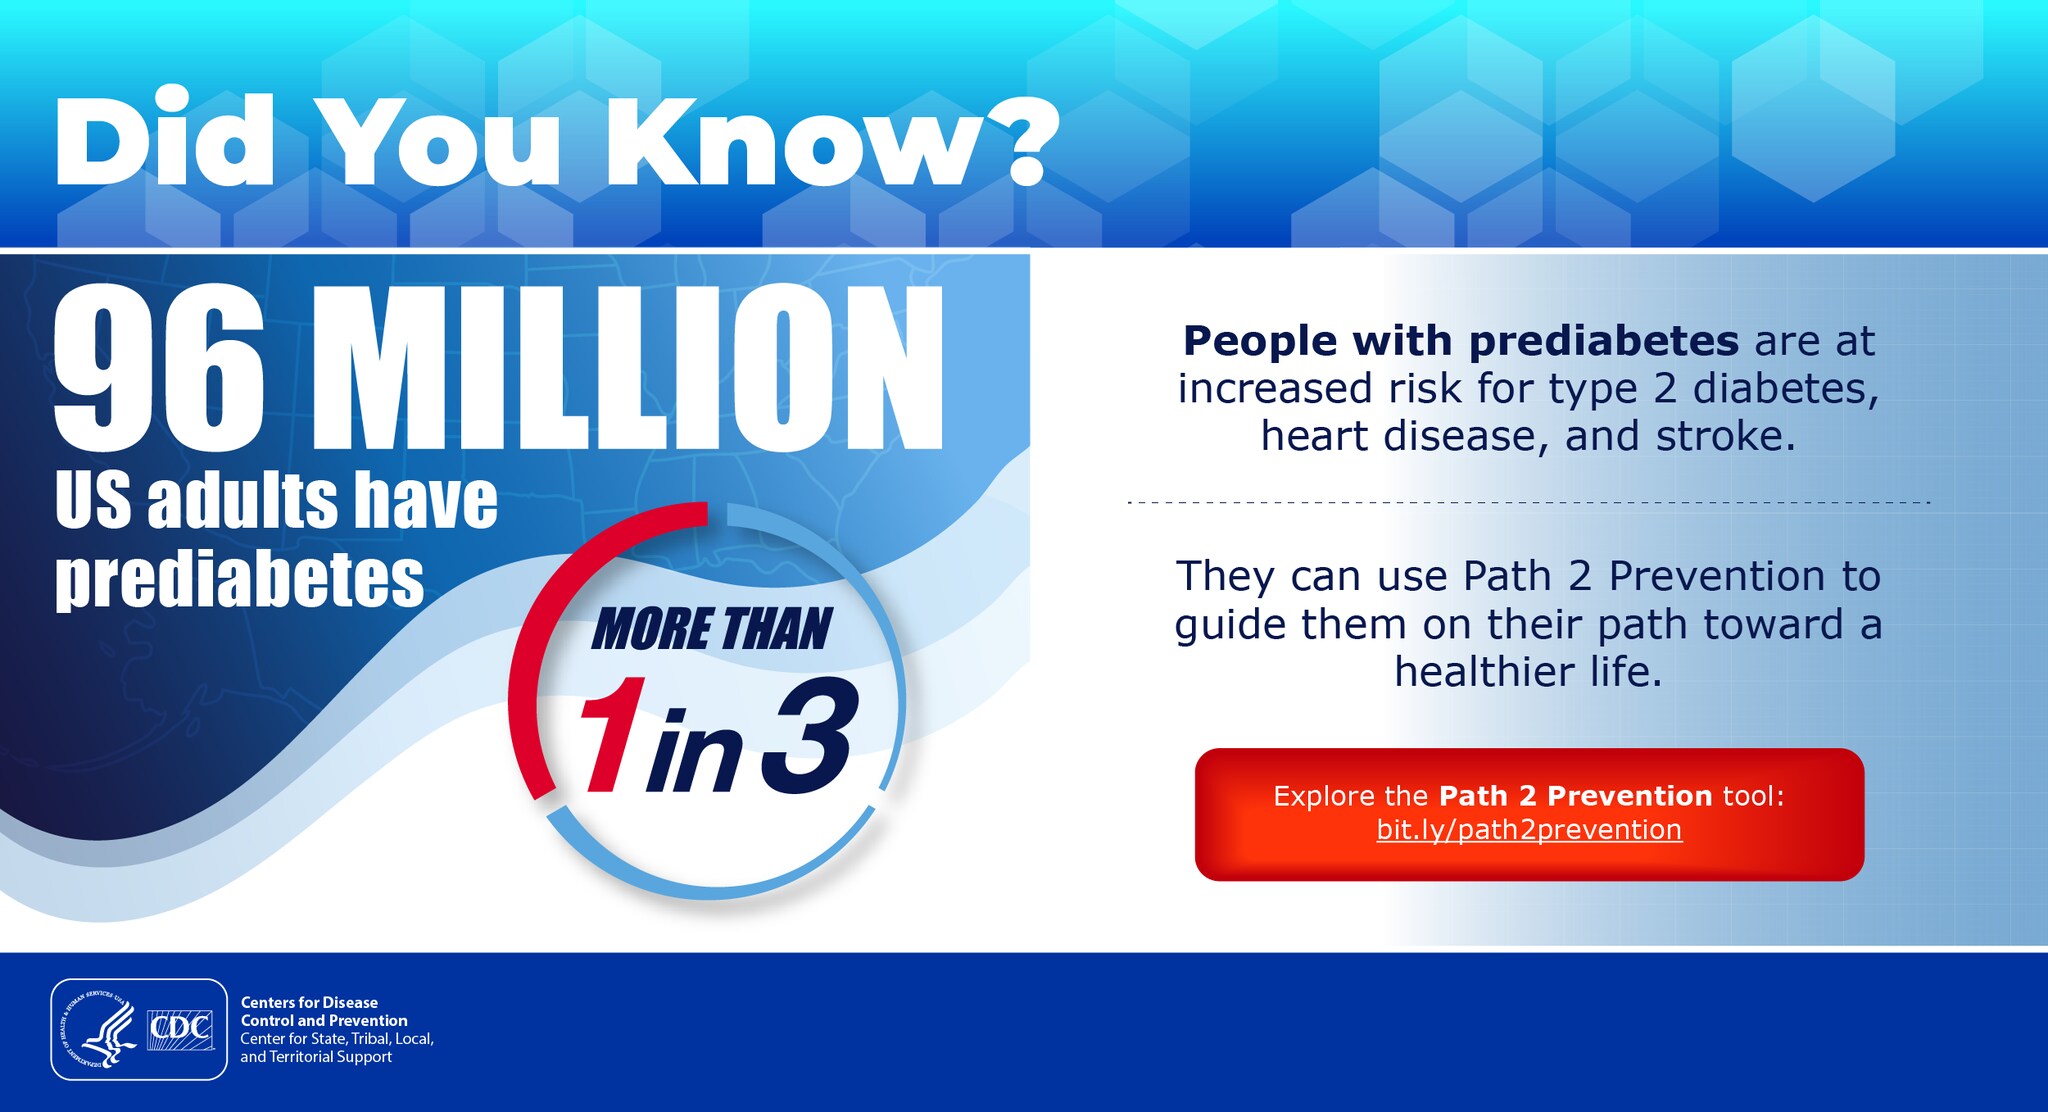 An infographic titled Did You Know? Text says “96 million US adults have prediabetes -- that’s more than 1 in 3. People with prediabetes are at increased risk for type 2 diabetes, heart disease, and stroke. People at risk for type 2 diabetes can use Path 2 Prevention to guide them on their path towards a healthier life. Explore the Path 2 Prevention tool today: bit.ly/path2prevention"